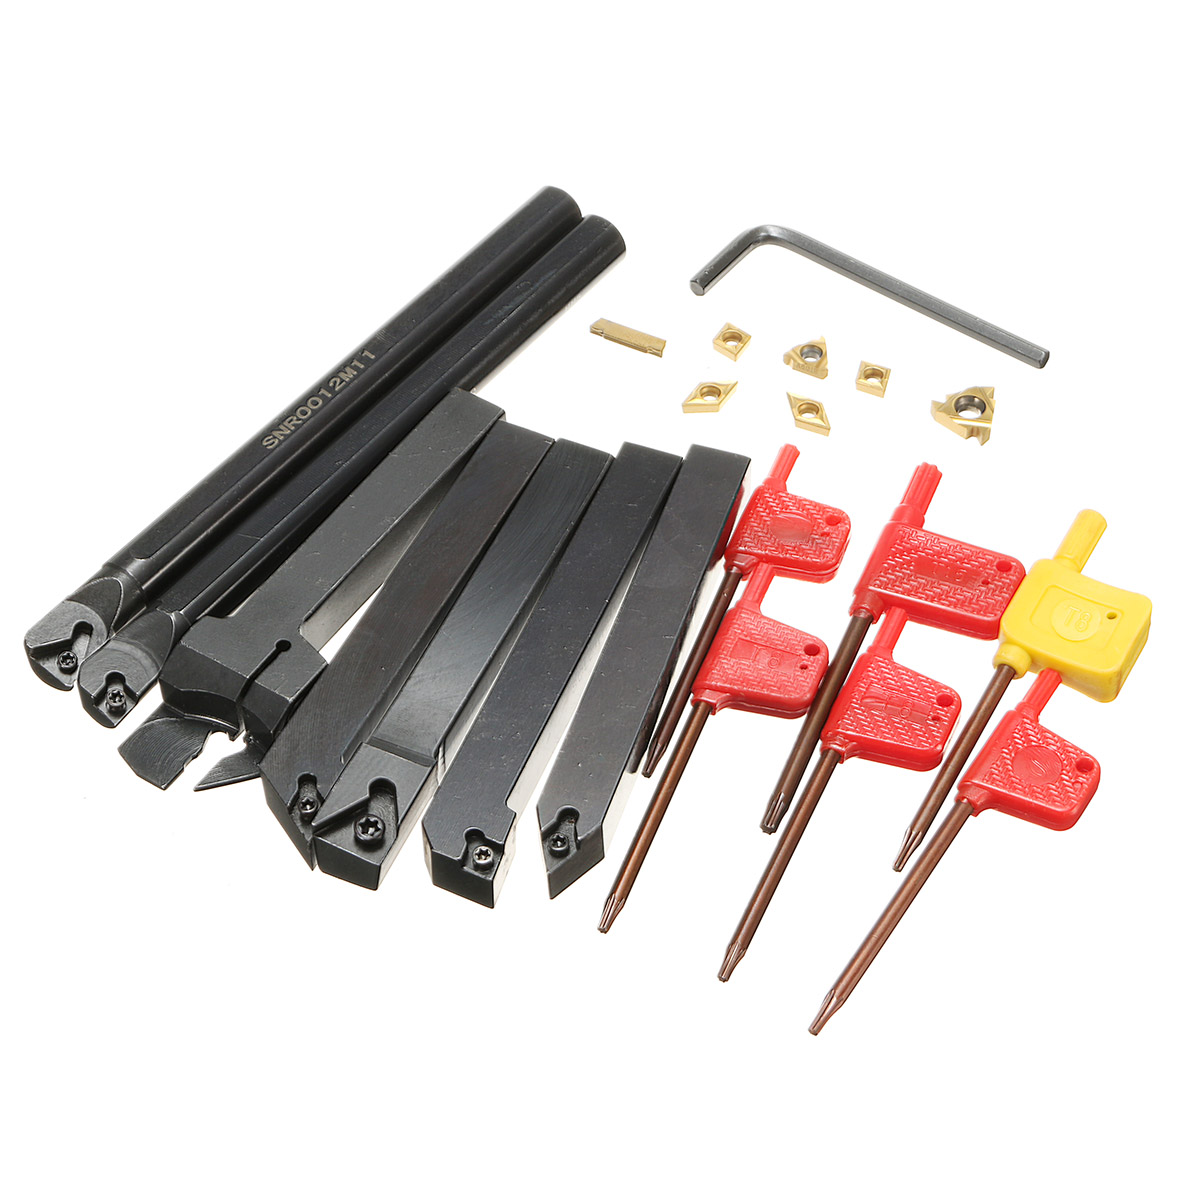 Drillpro-7pcs-12mm-Shank-Lathe-Set-Boring-Bar-Turning-Tool-Holder-with-Carbide-Inserts-CCMT060204-DC-1150453-9